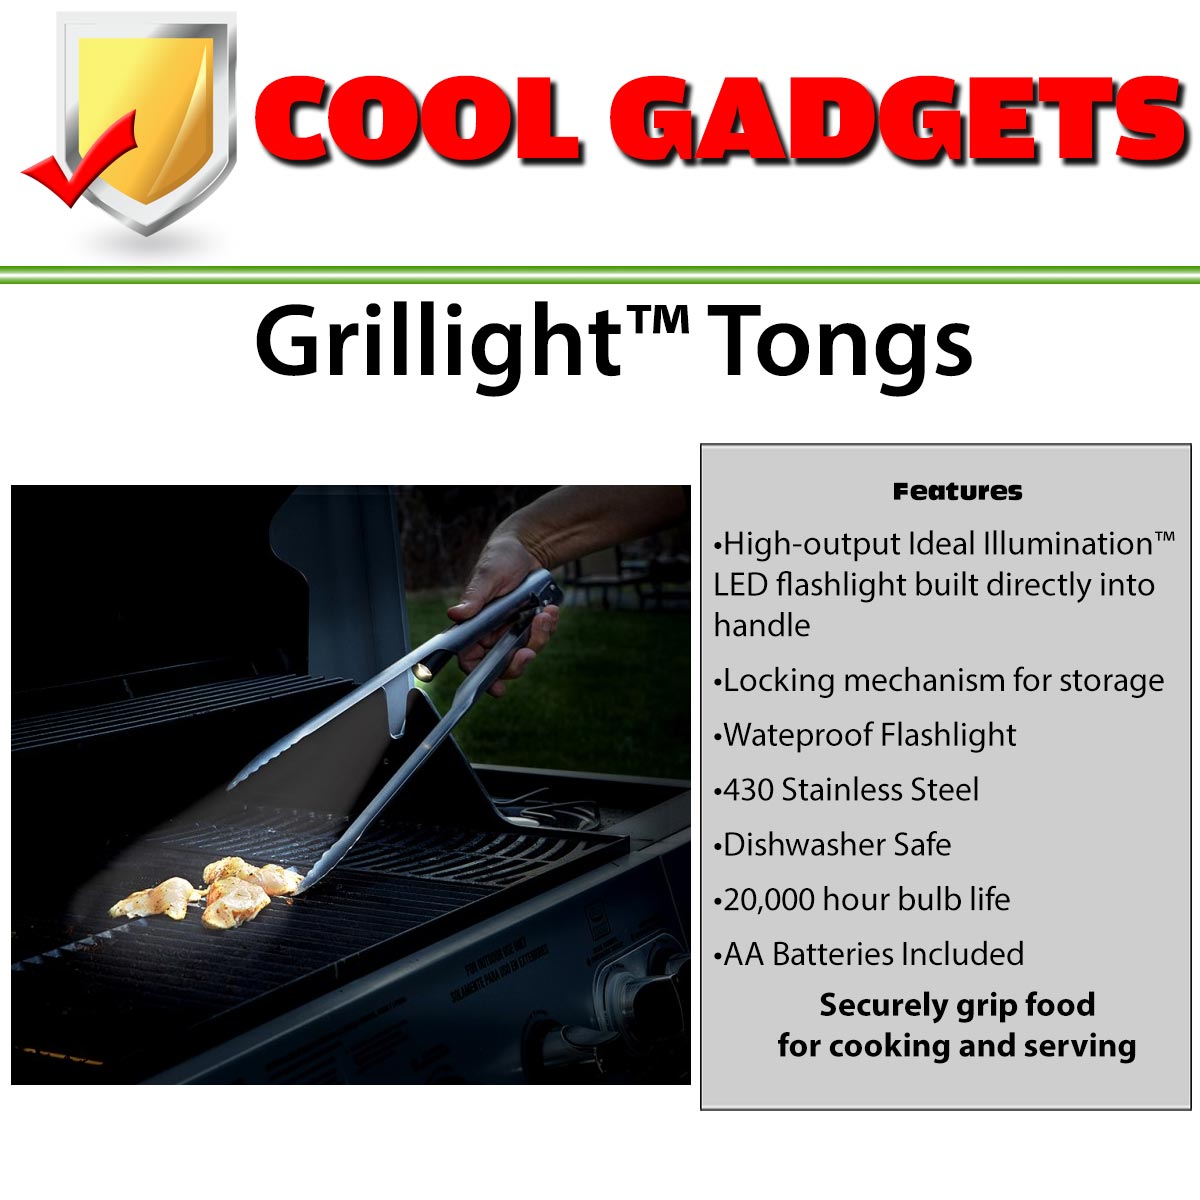 ___Cool-Gadgets-grillight-tongs_Rev-1